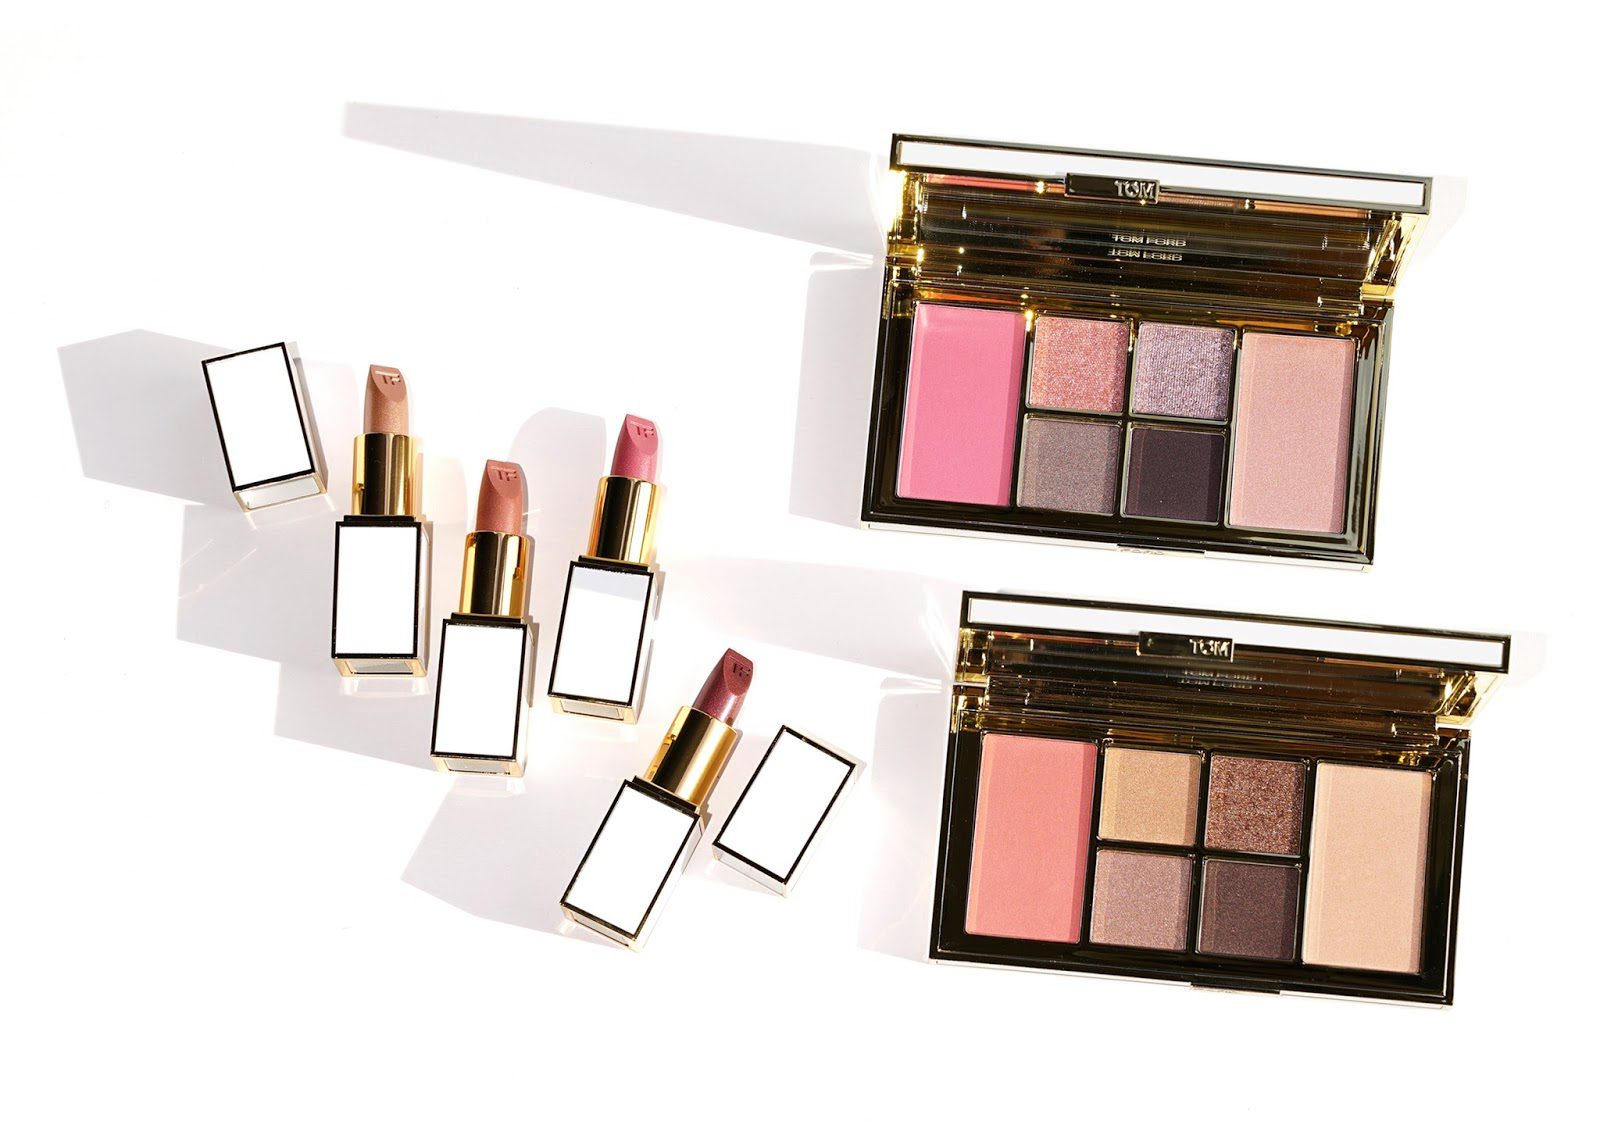 Beauty Brand Spotlight – Tom Ford – The Luxe Lifestyle & Beauty Blog